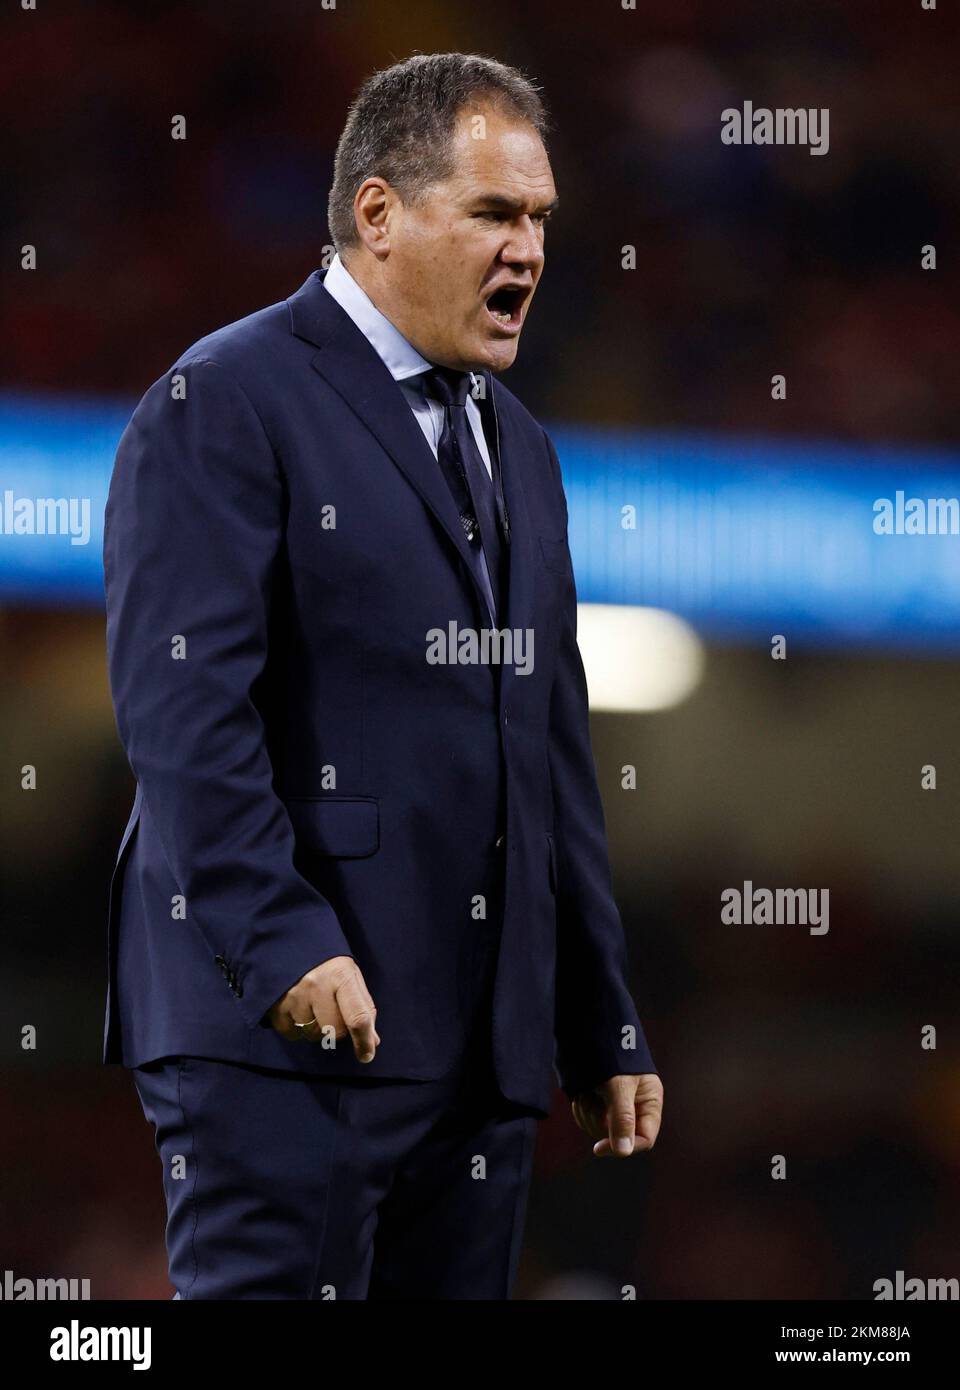 Rugby Union - International - Wales v Australia - Principality Stadium, Cardiff, Wales, Britain - November 26, 2022 Australia head coach Dave Rennie before the match Action Images via Reuters/Andrew Couldridge Stock Photo